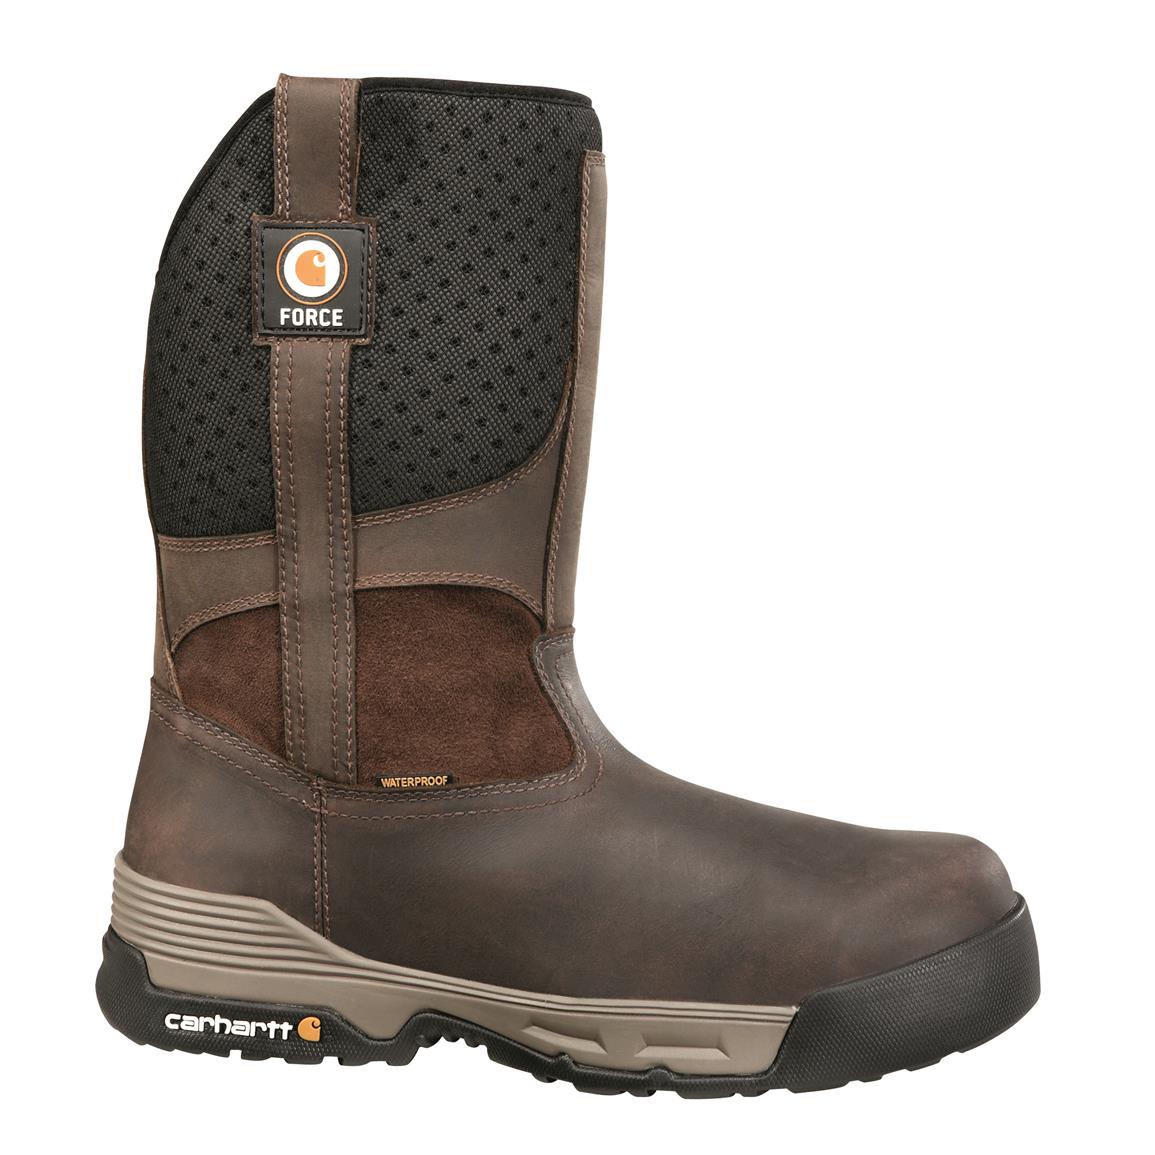 Carhartt Force Mens Waterproof 10 Composite Toe Pull On Work Boots